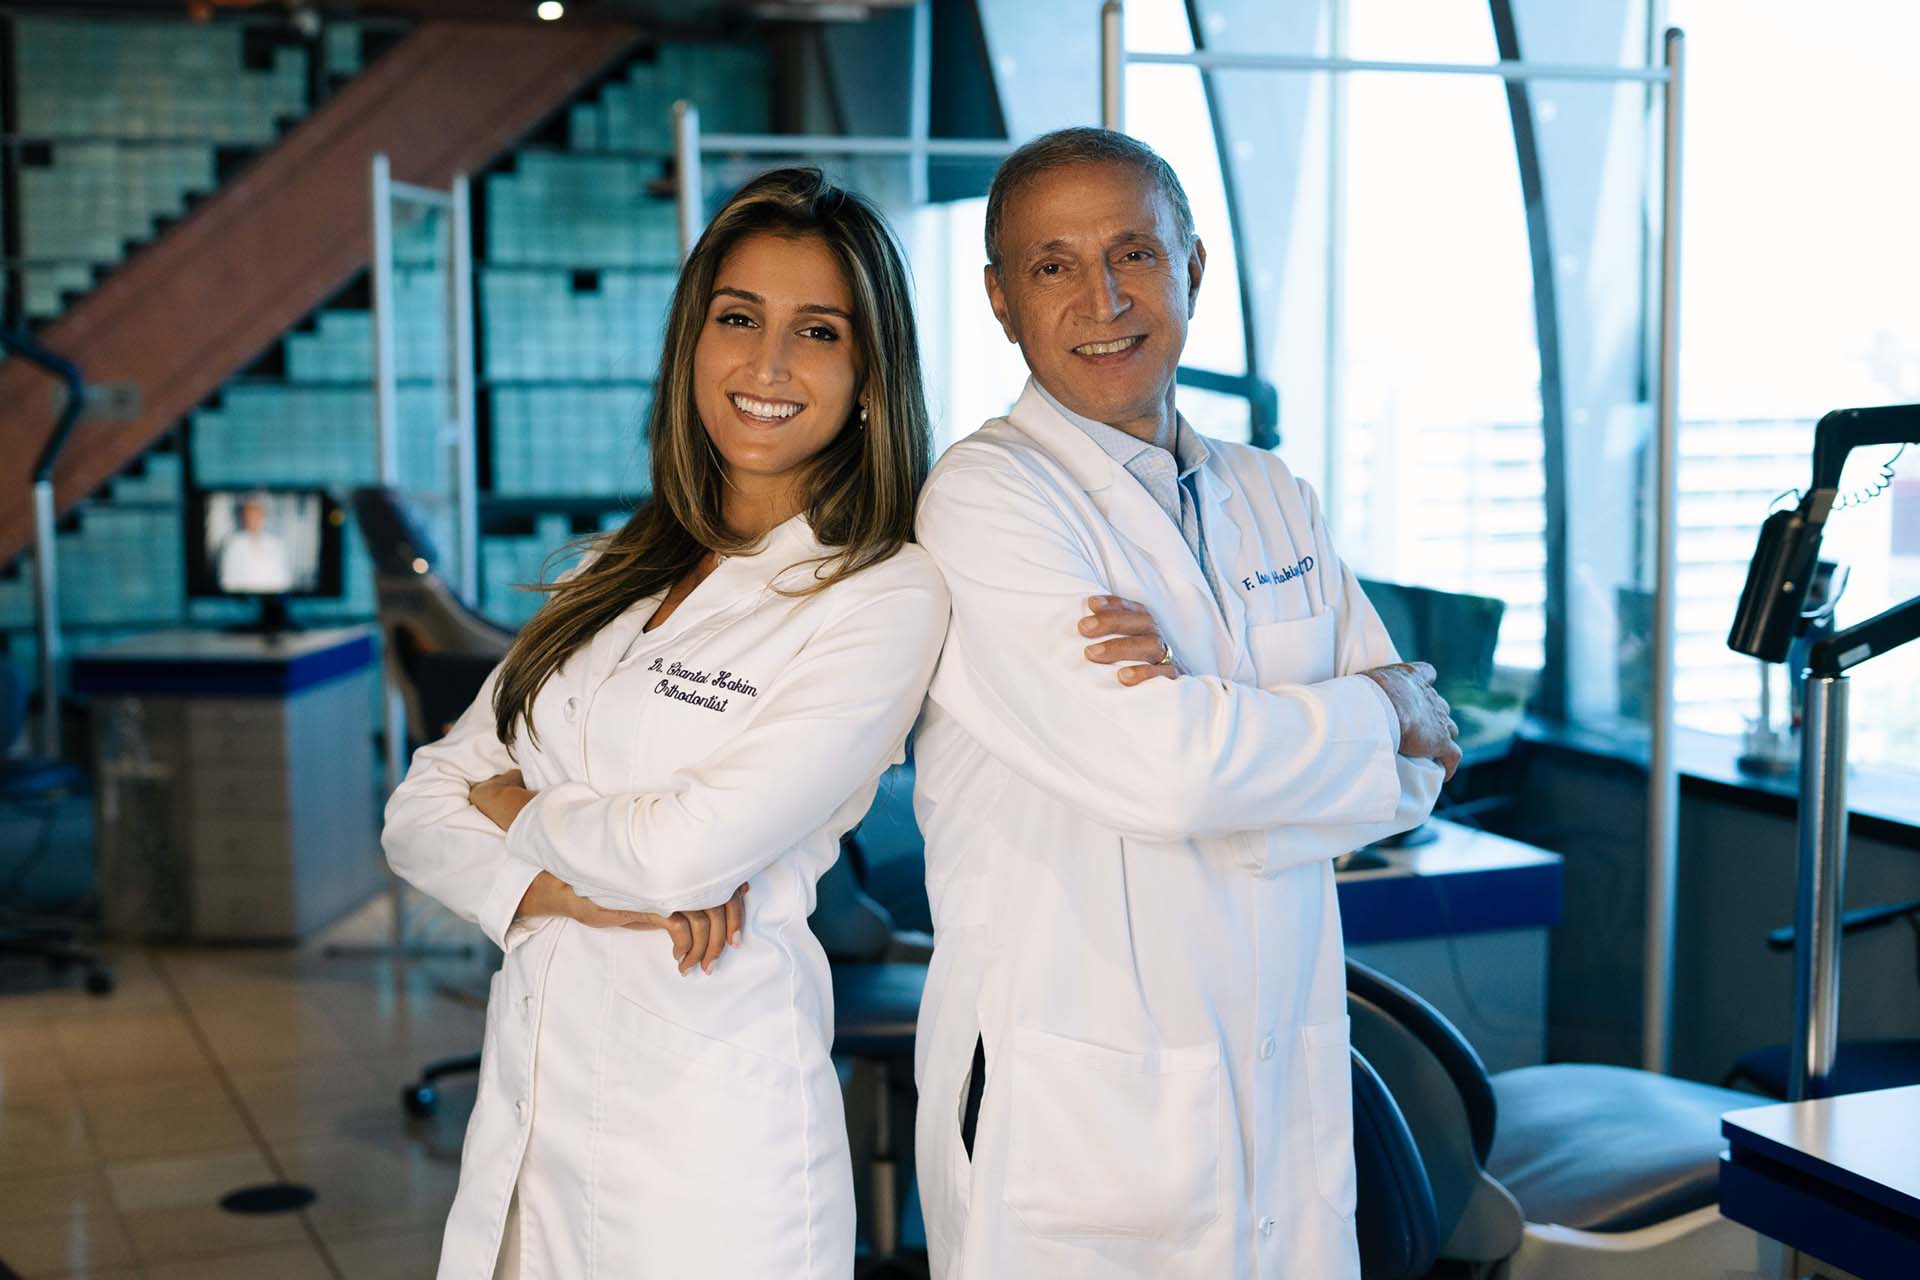 Dr. Chantal Hakim and Dr. F. Isaac Hakim at the Orthospaceship in Los Angeles, a Southern California orthodontic practice serving Bel Air, Los Angeles.